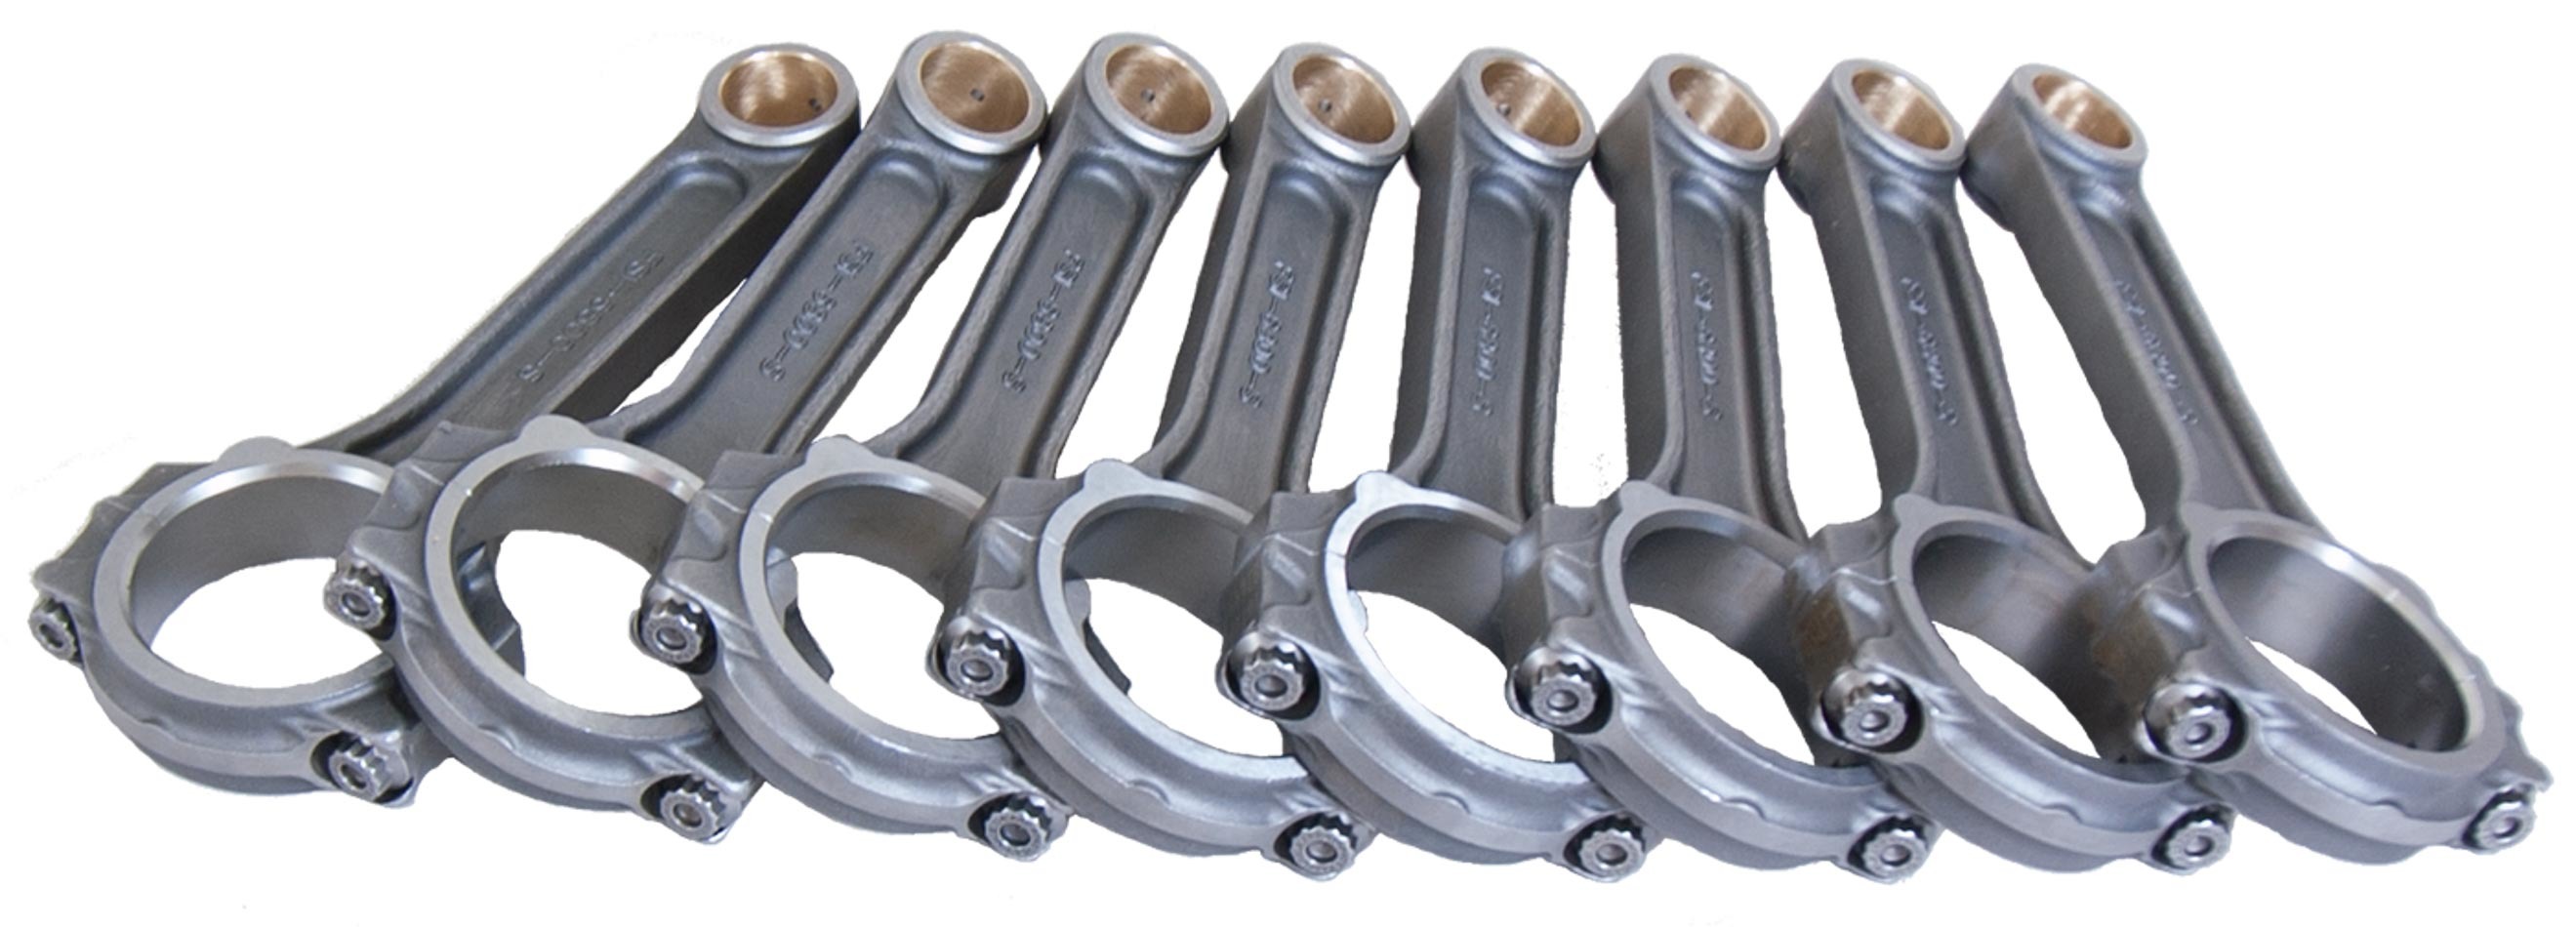 Eagle FSI6800 - Connecting Rod, I Beam, 6.800 in Long, Bushed, 7/16 in Cap Screws, Forged Steel, Big Block Chevy, Set of 8